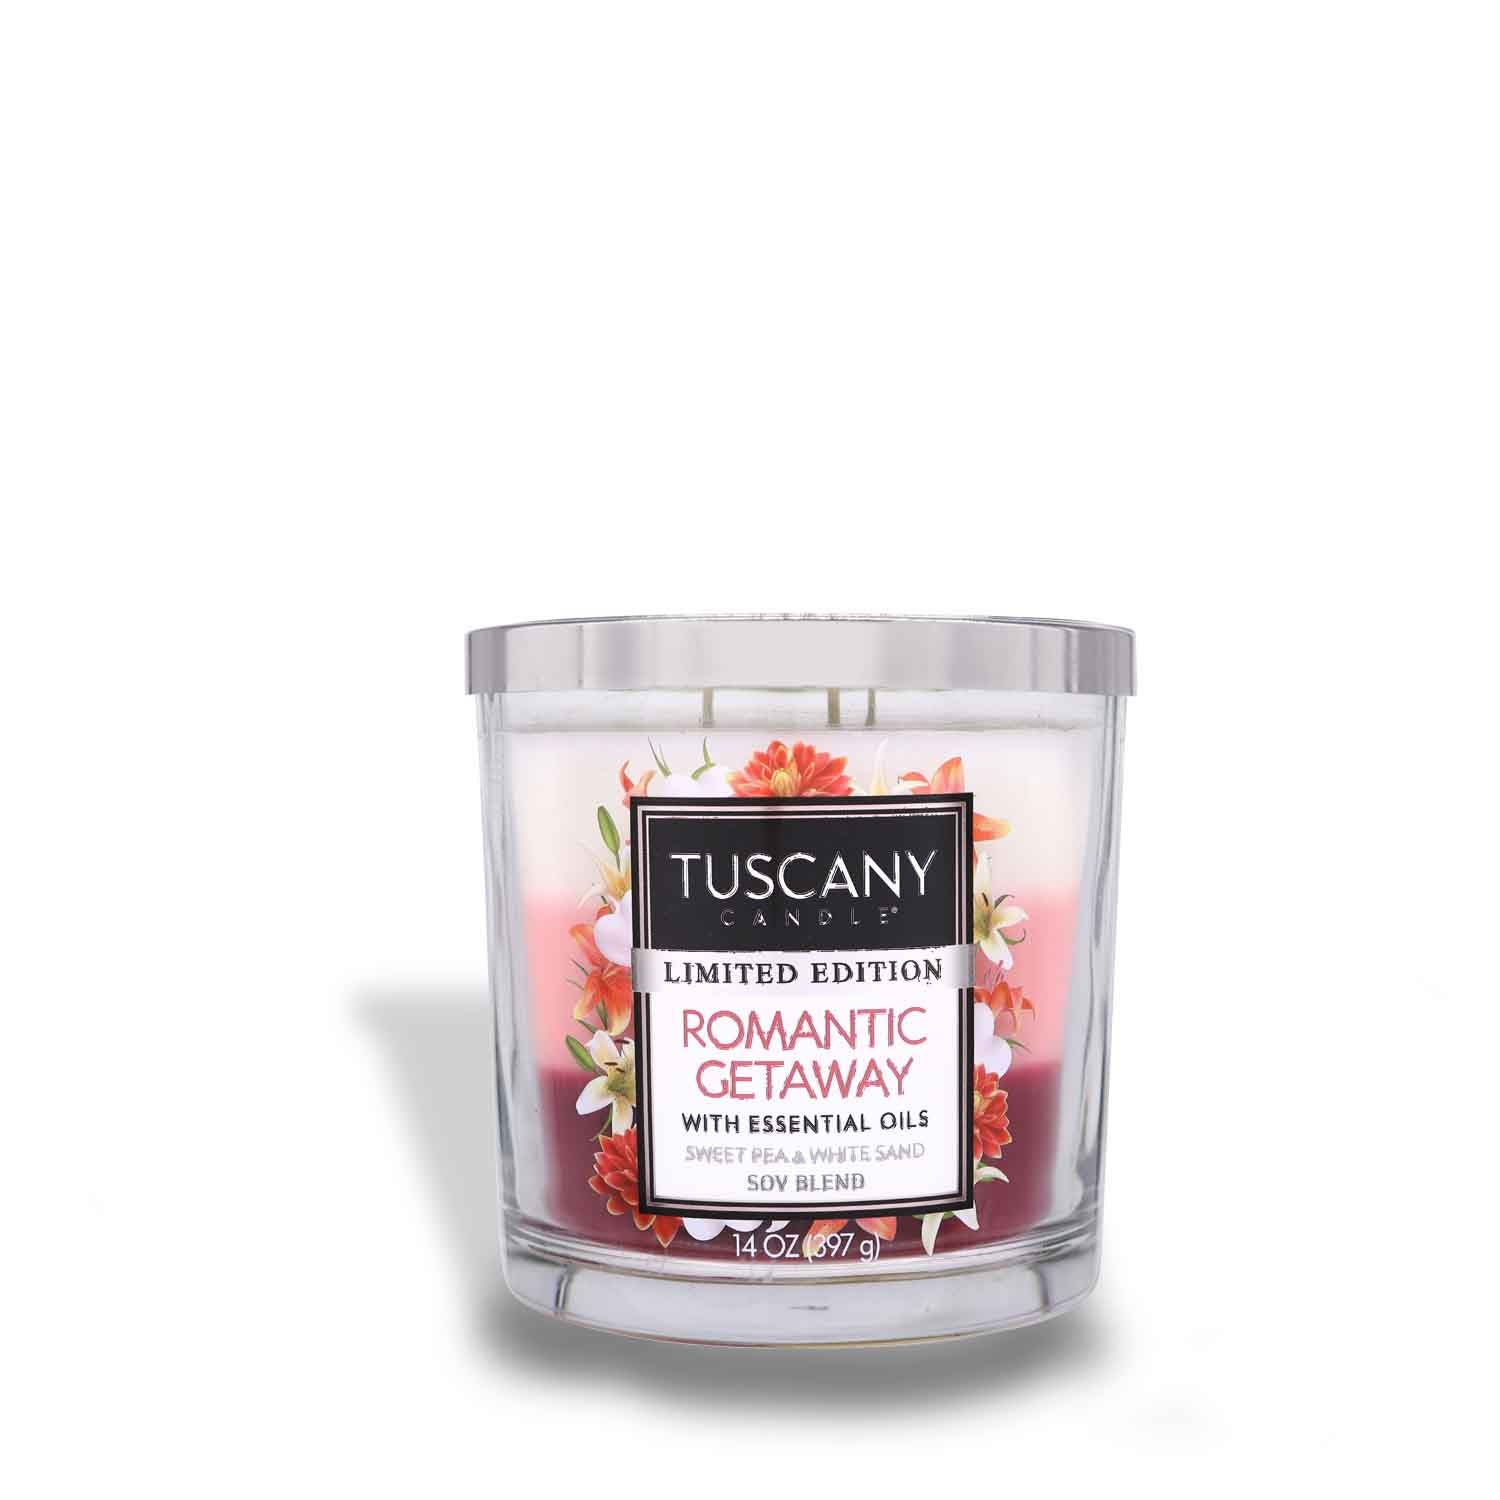 A Romantic Getaway Long-Lasting Scented Jar Candle (14 oz) in a glass container by Tuscany Candle® SEASONAL.